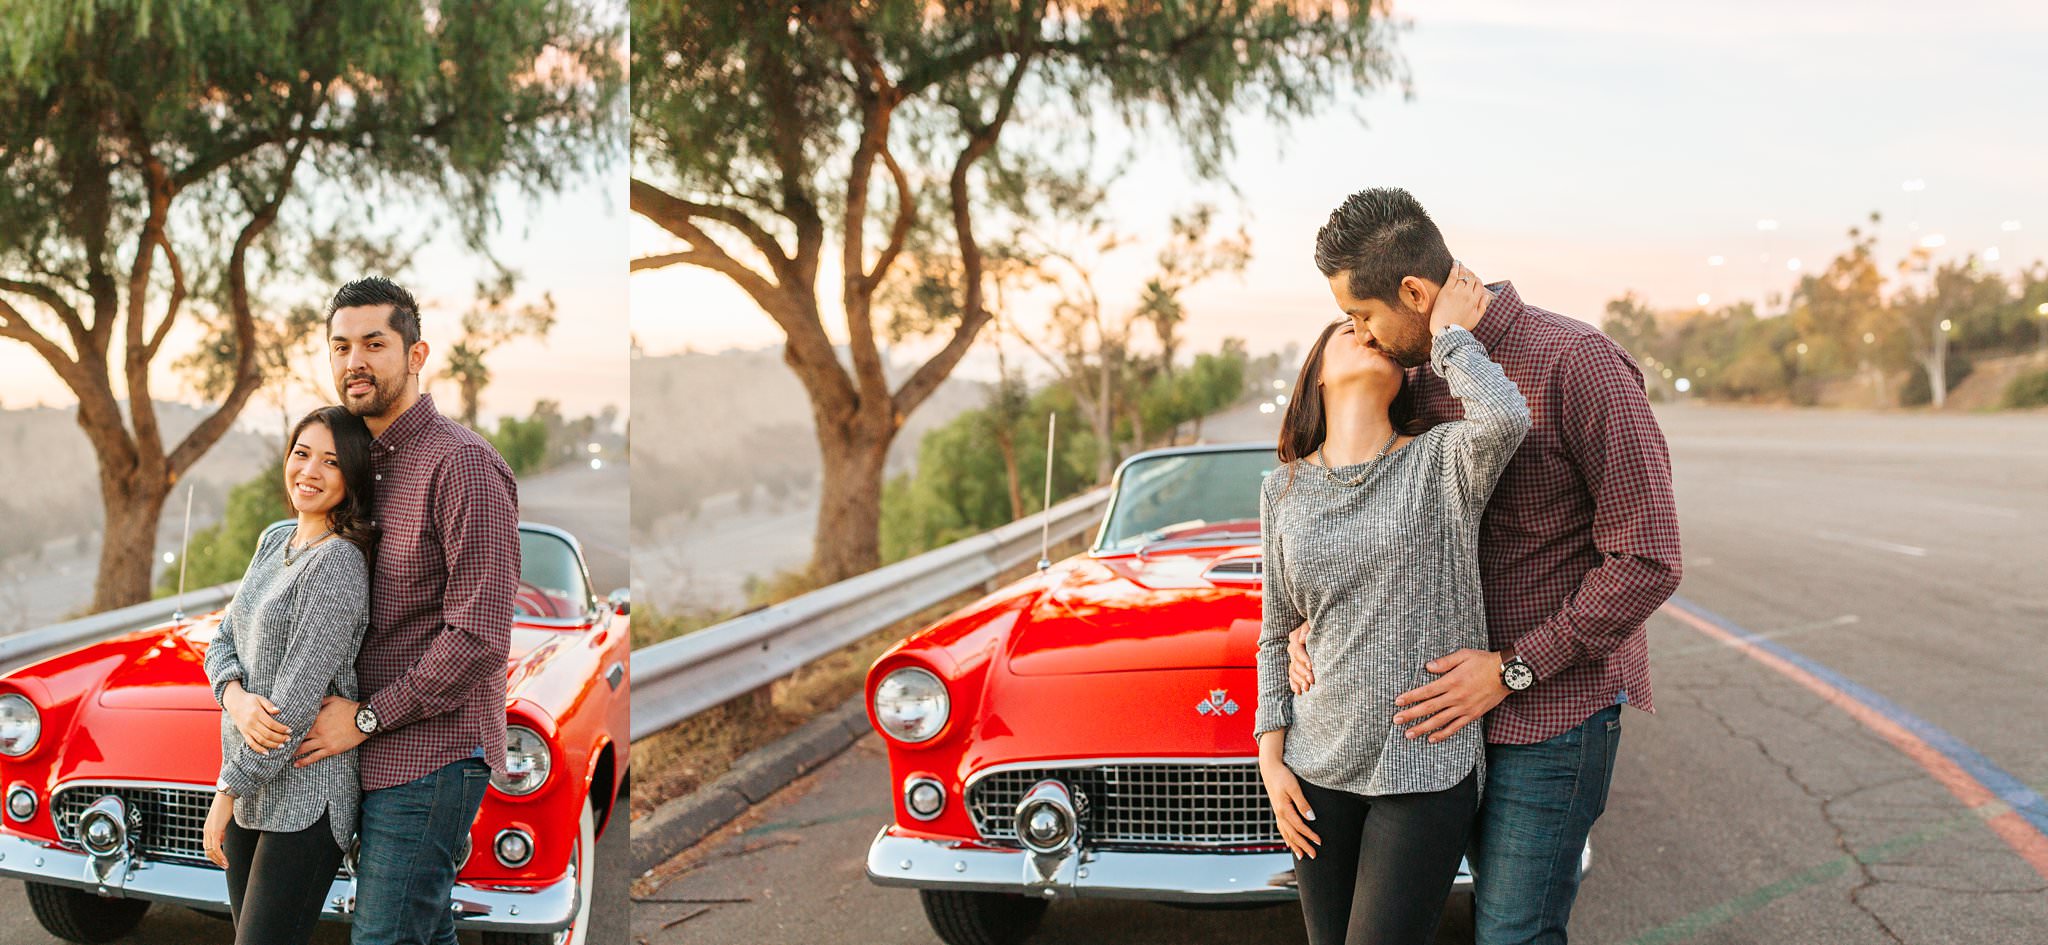 Classic Car Engagement Session at Dodger Stadium in Los Angeles - Los Angeles Wedding Photographer - http://brittneyhannonphotography.com